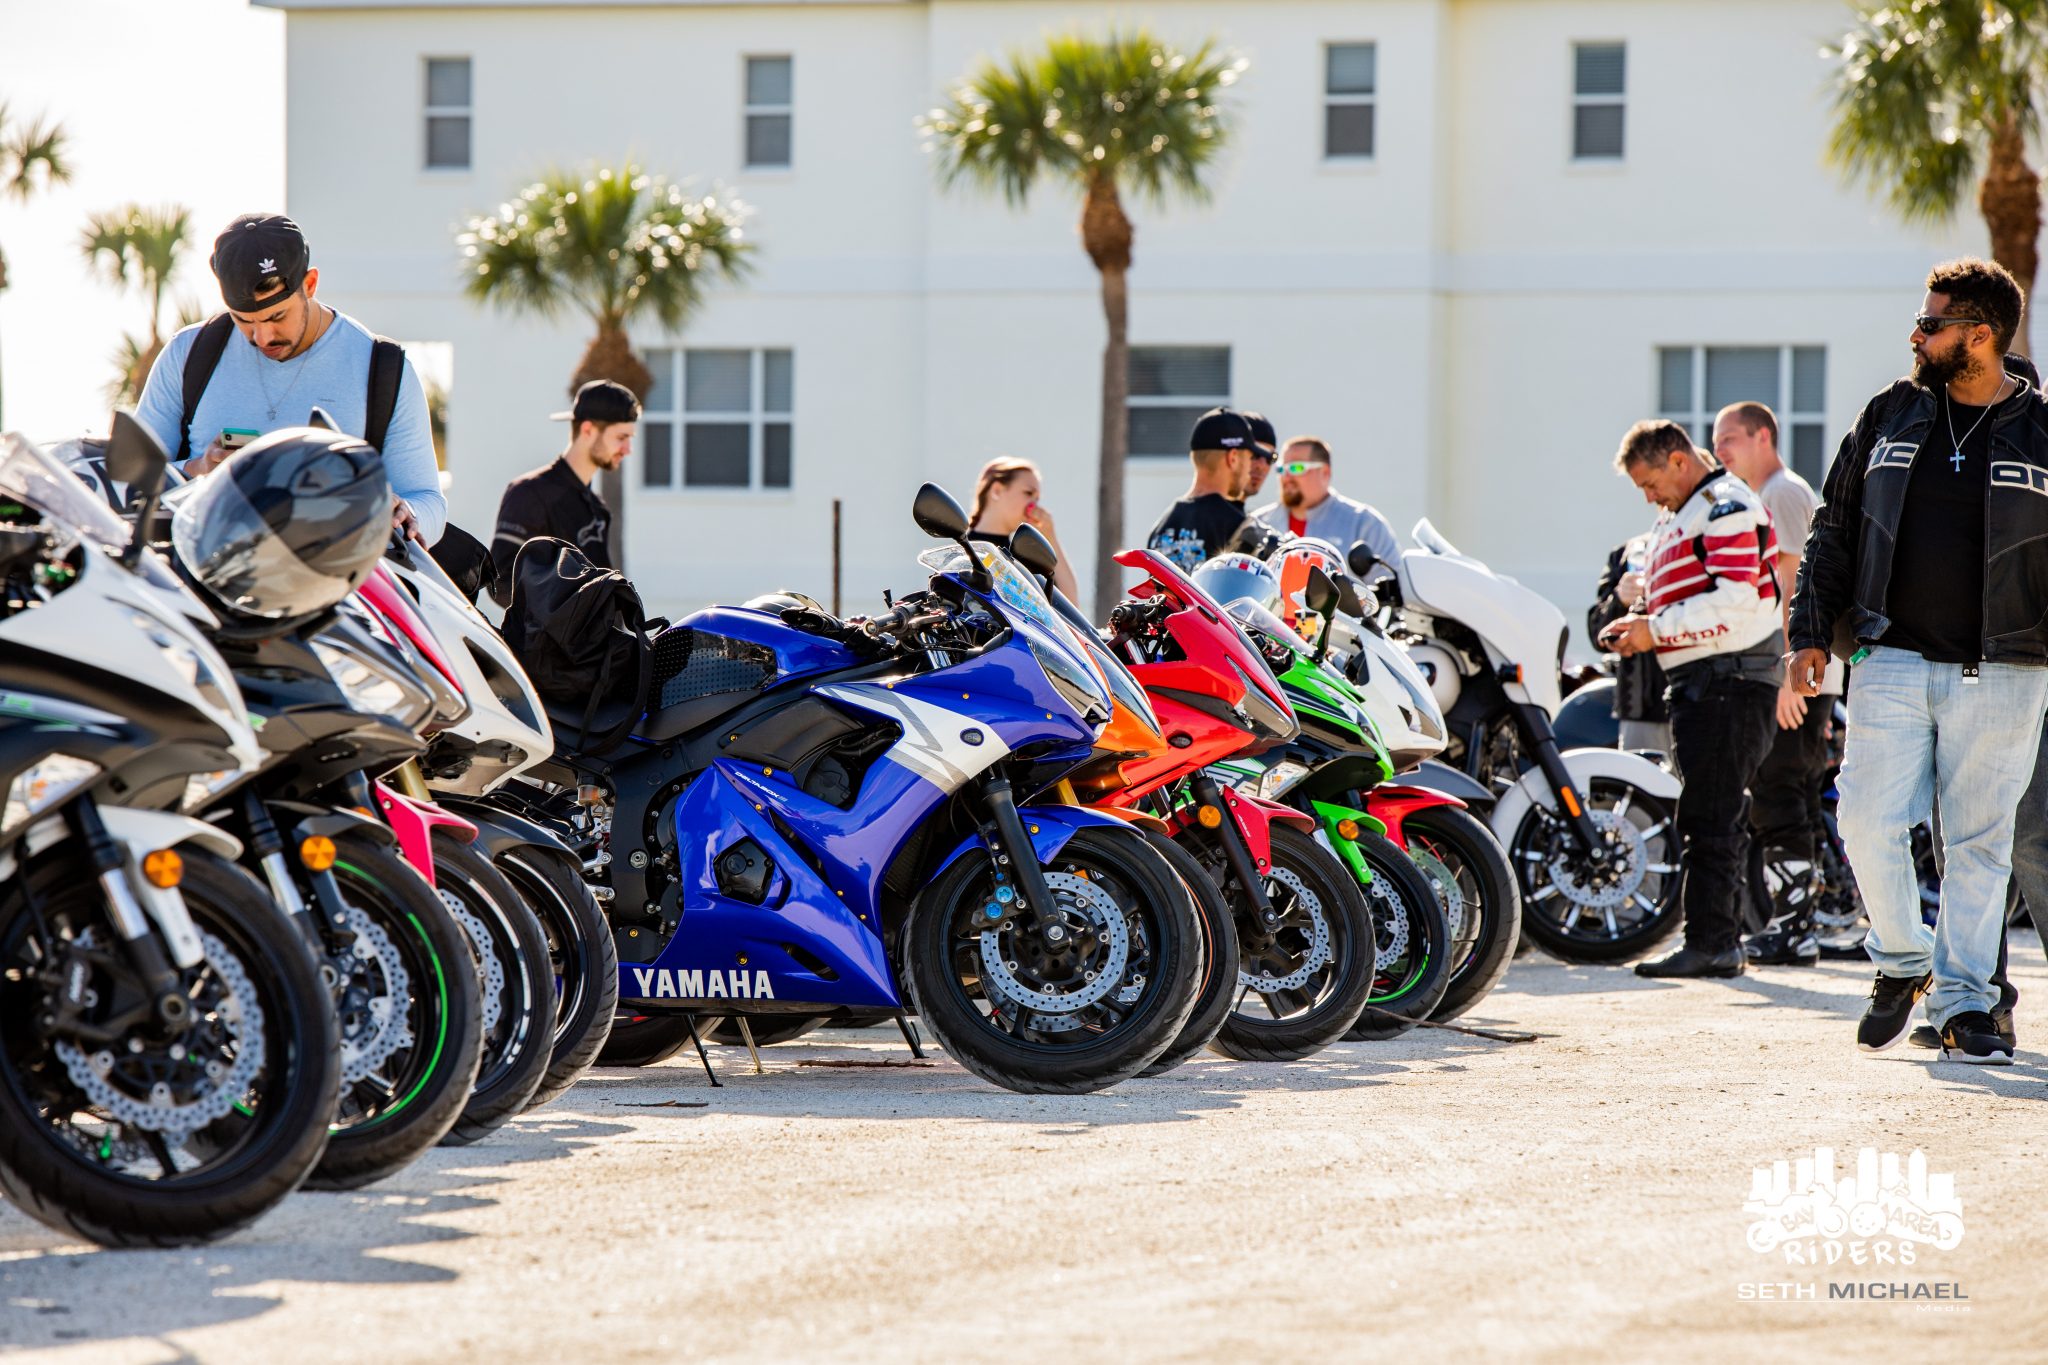 Bay Area Riders | Tampa Bay Motorcycle Group - Bay Area Riders